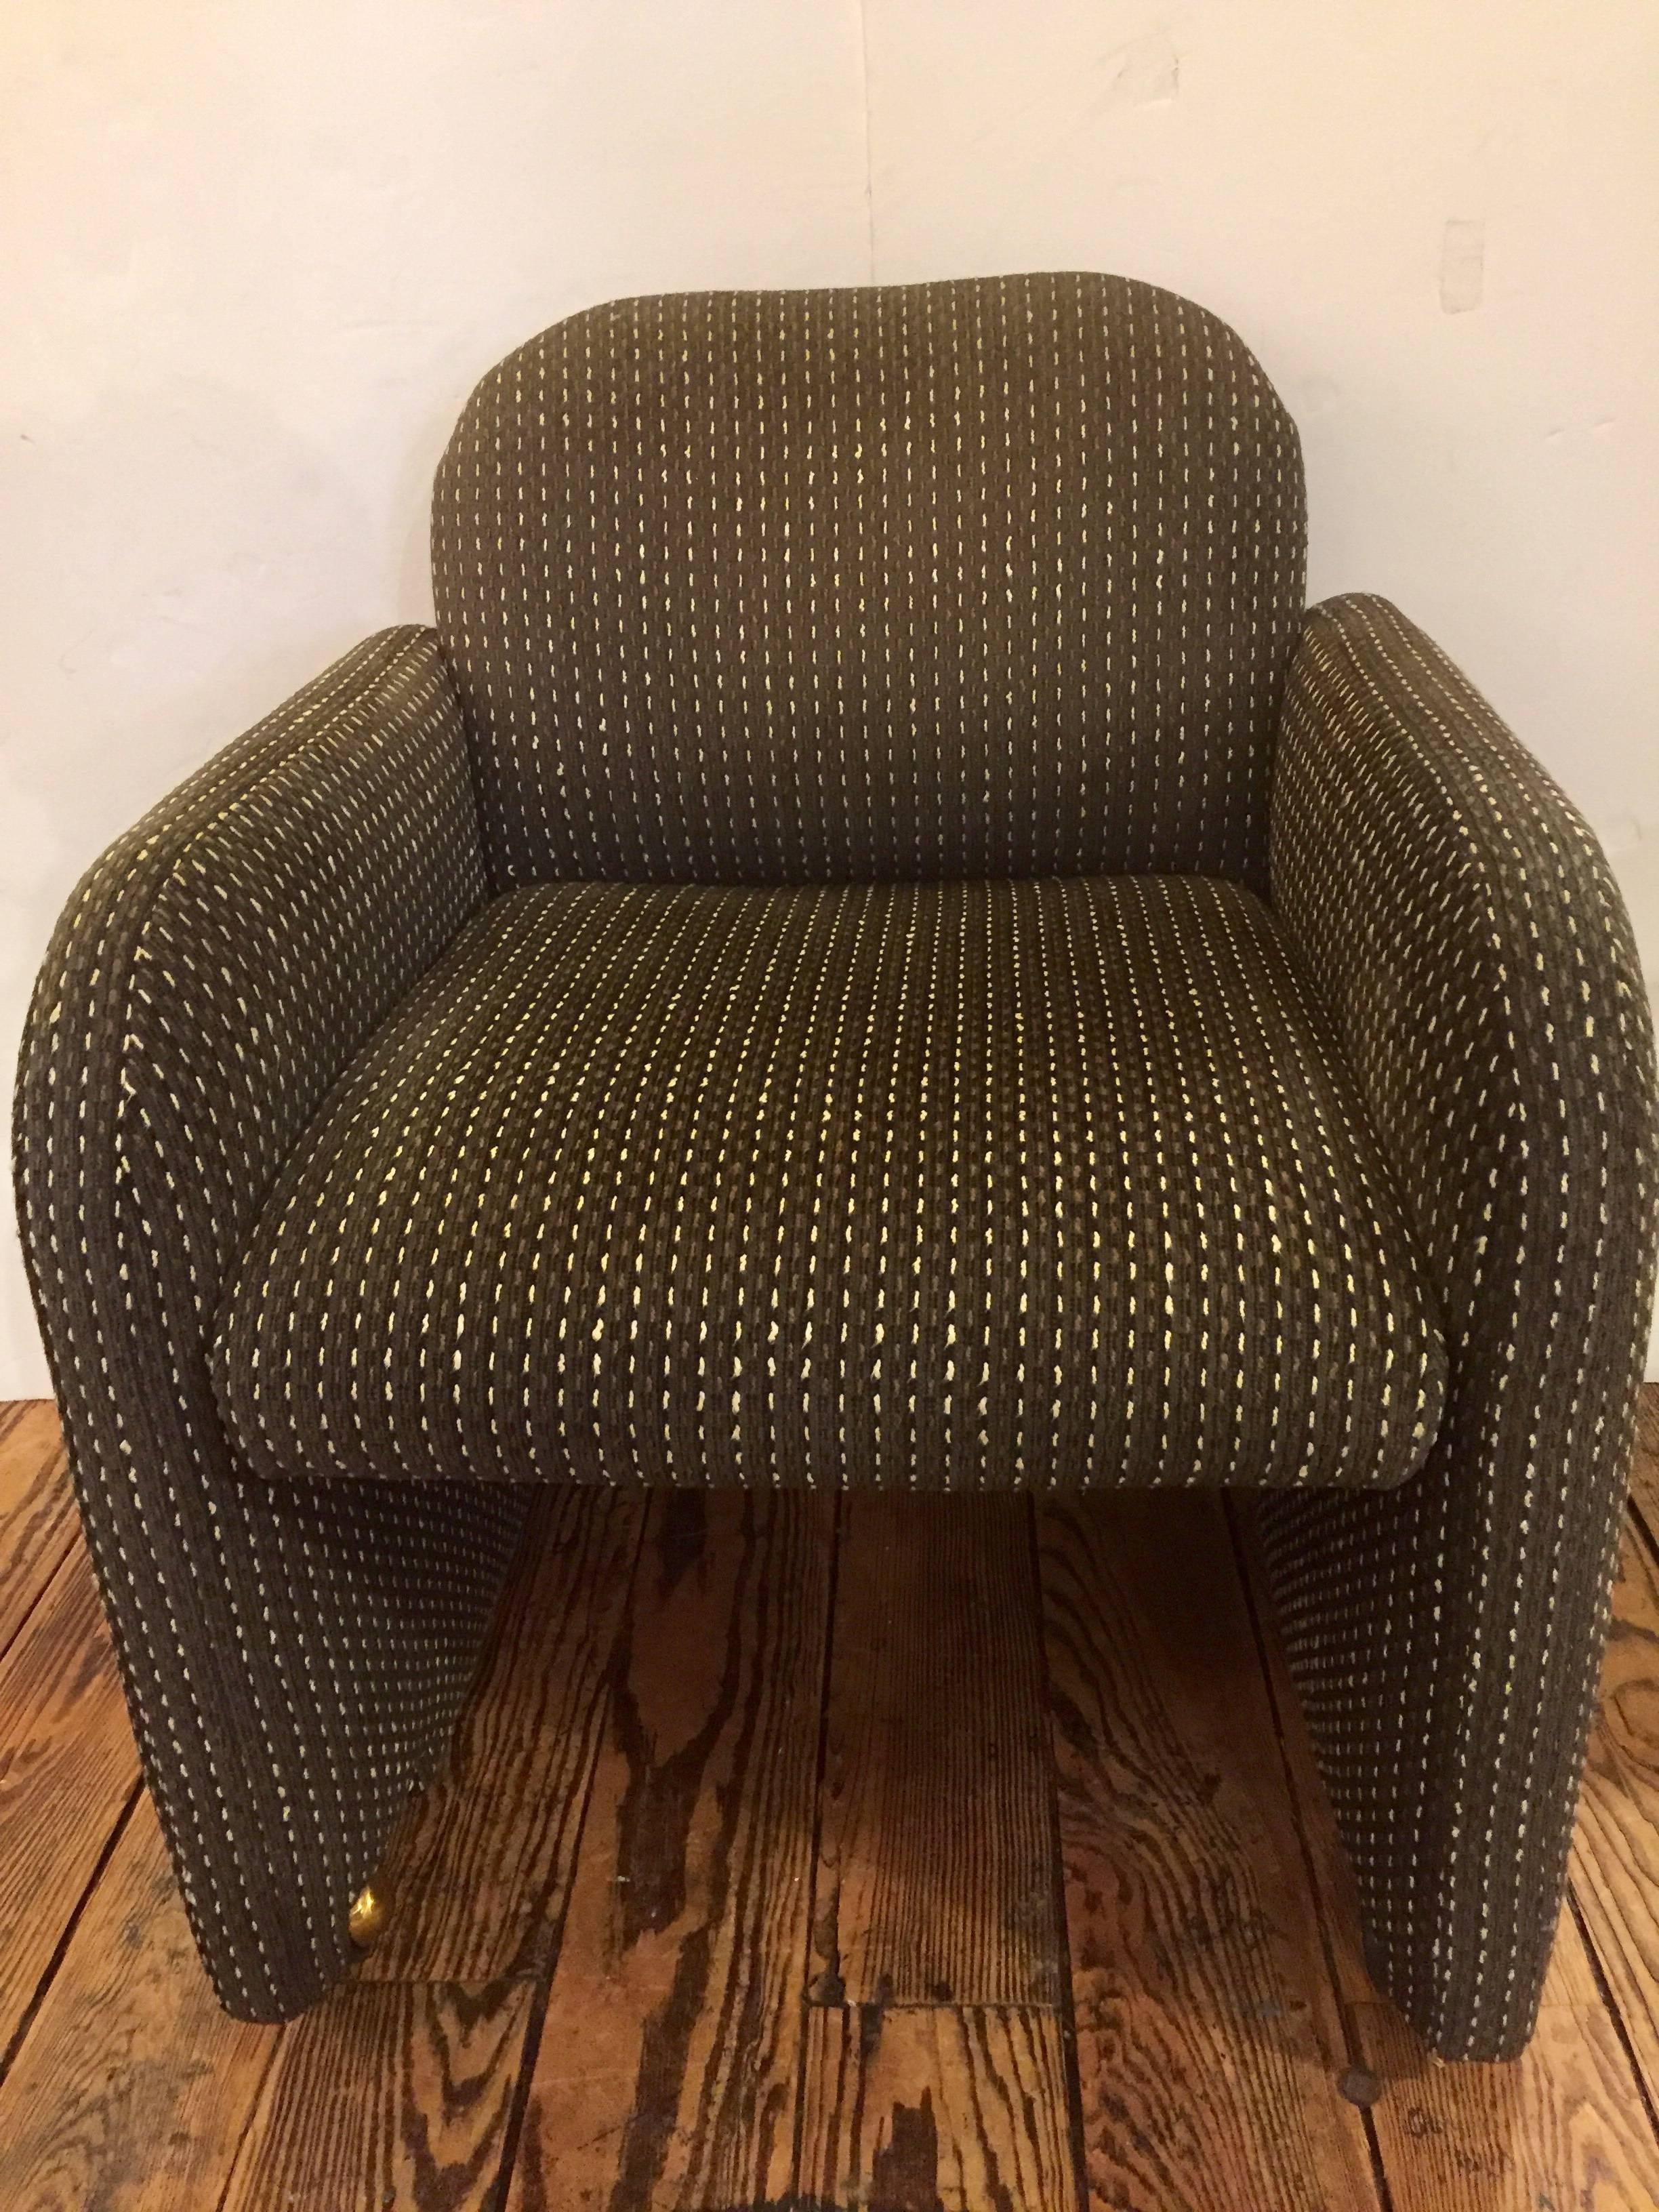 Very comfortable box shaped handsome Mid-Century Modern upholstered club chairs in a brown tweedy fabric on brass casters. A set of four are available.
Measures: Seat height 18”.